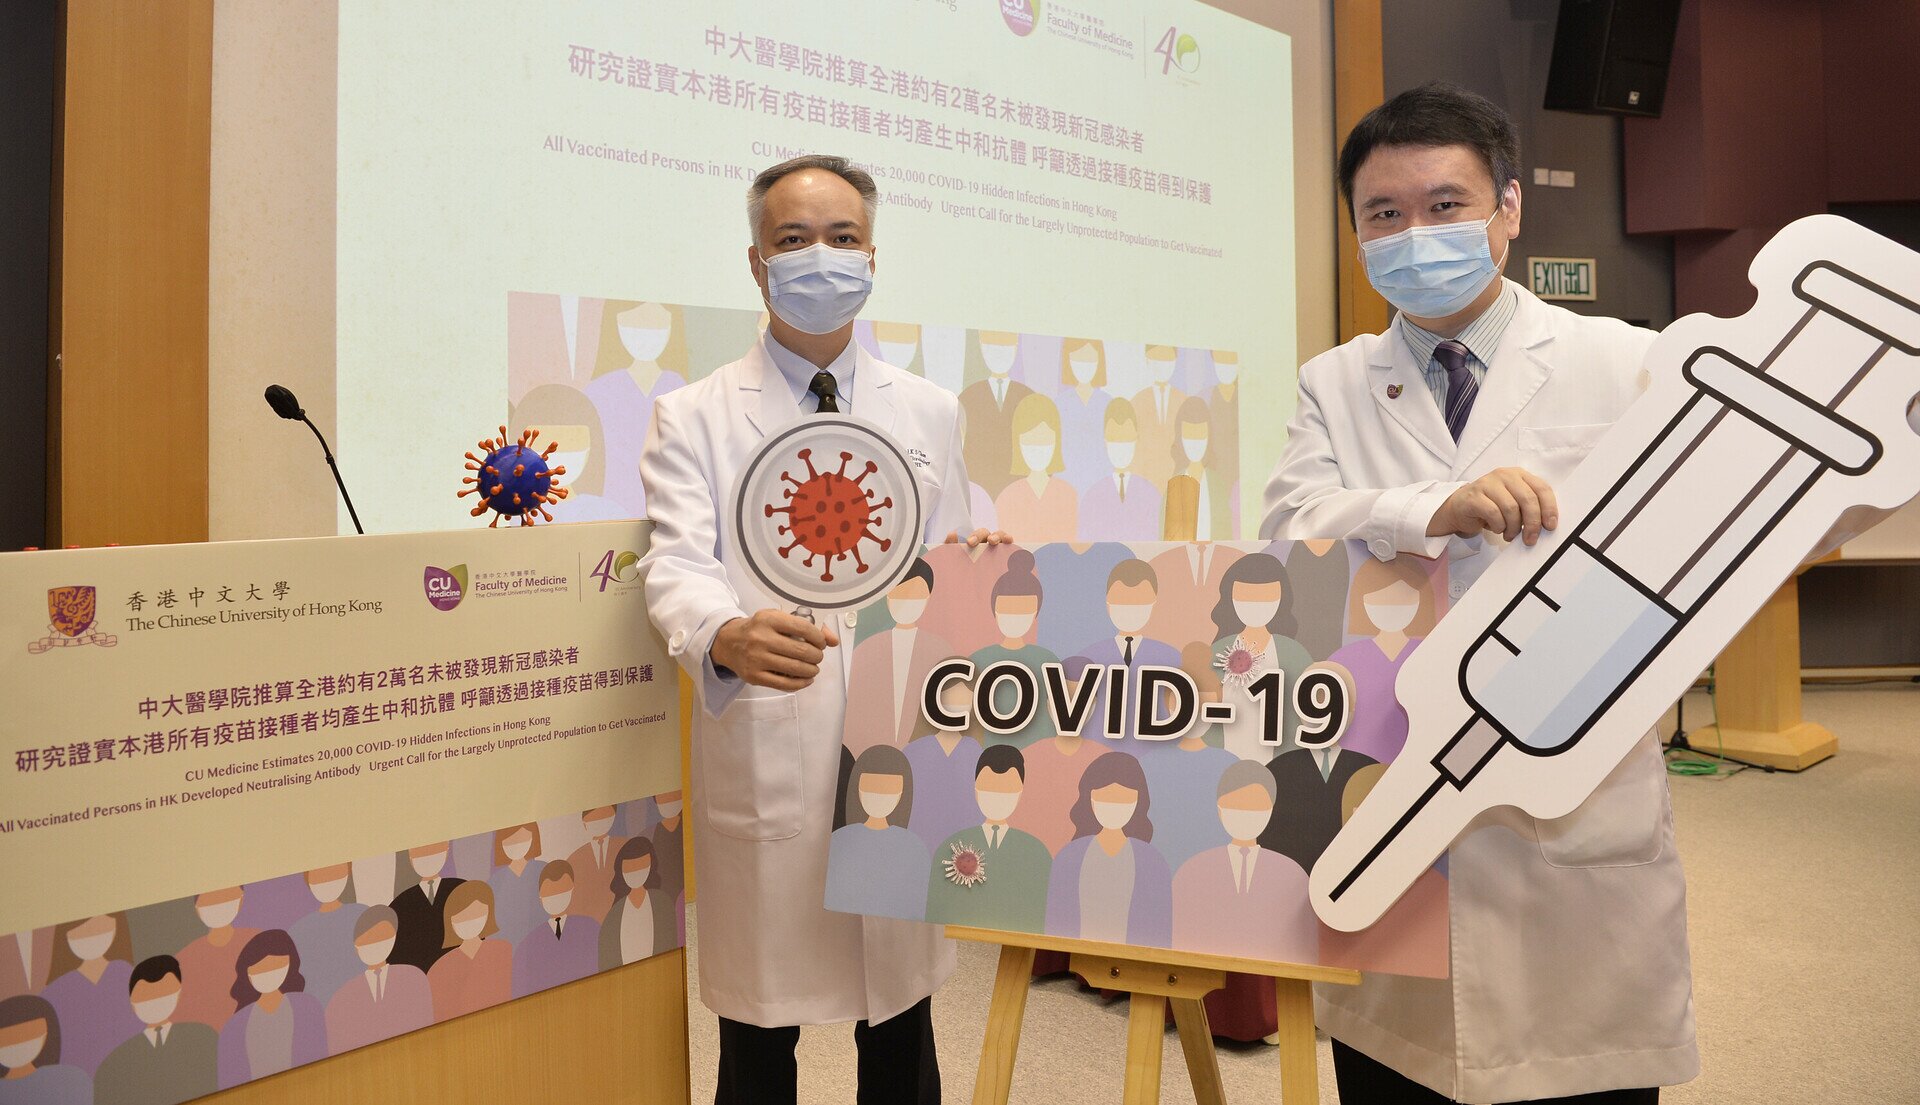 CU Medicine Estimates 20,000 COVID-19 Hidden Infections in Hong Kong  All Vaccinated Persons in HK Developed Neutralising Antibody After Two Doses  Urgent Call for the Largely Unprotected Population to Get Vaccinated 